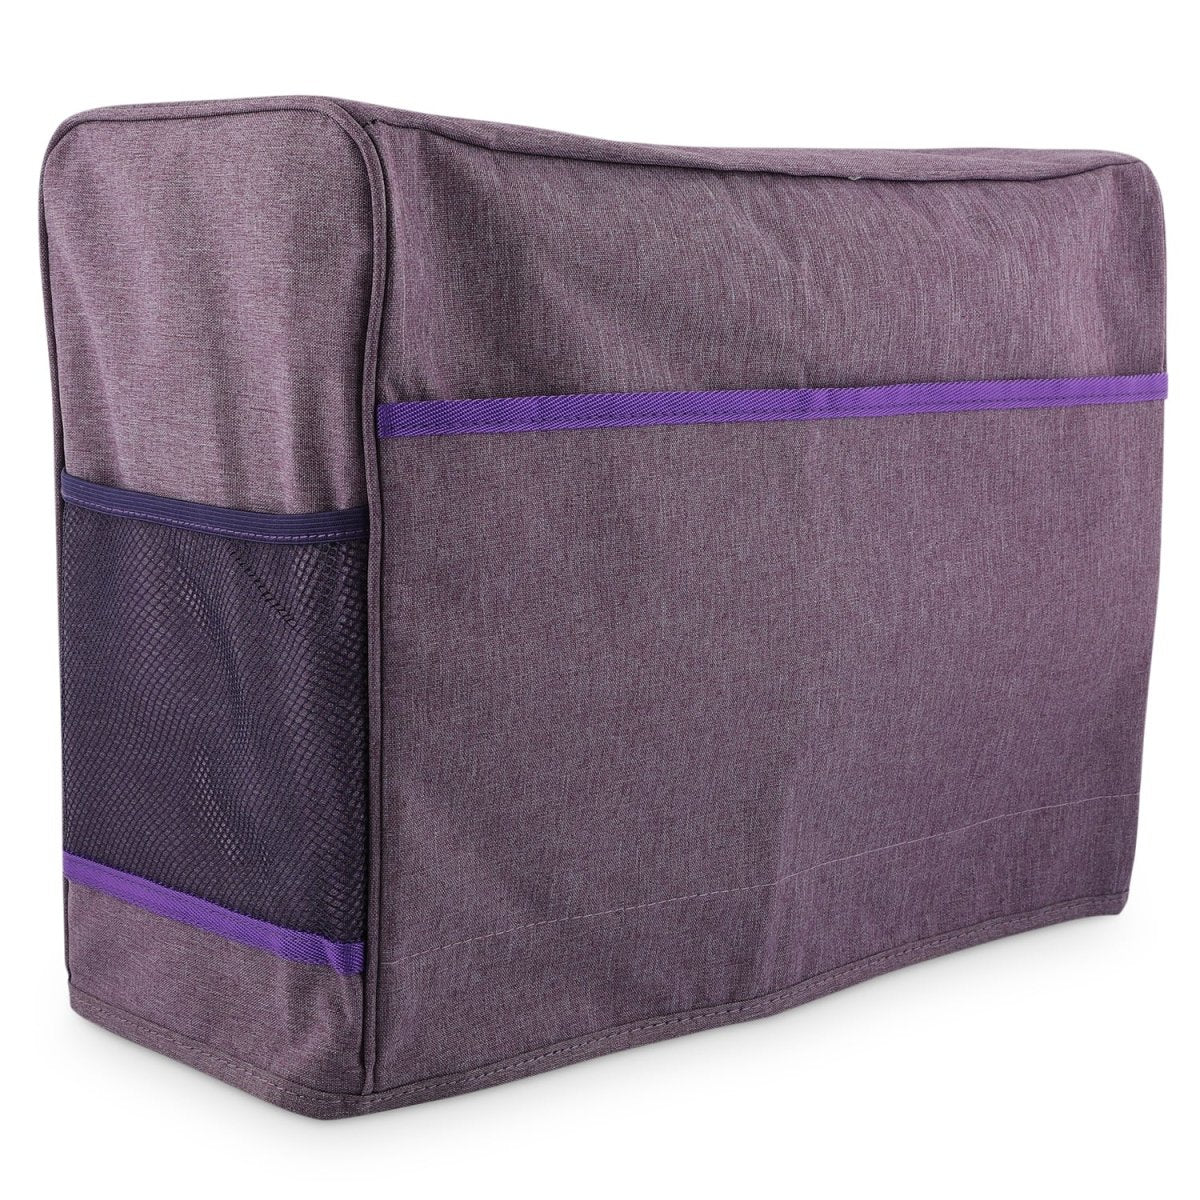 Sewing Machine Dust Cover Storage Cover for Most Basic Standard Machines  Purple Sewing Accessories Fabric 